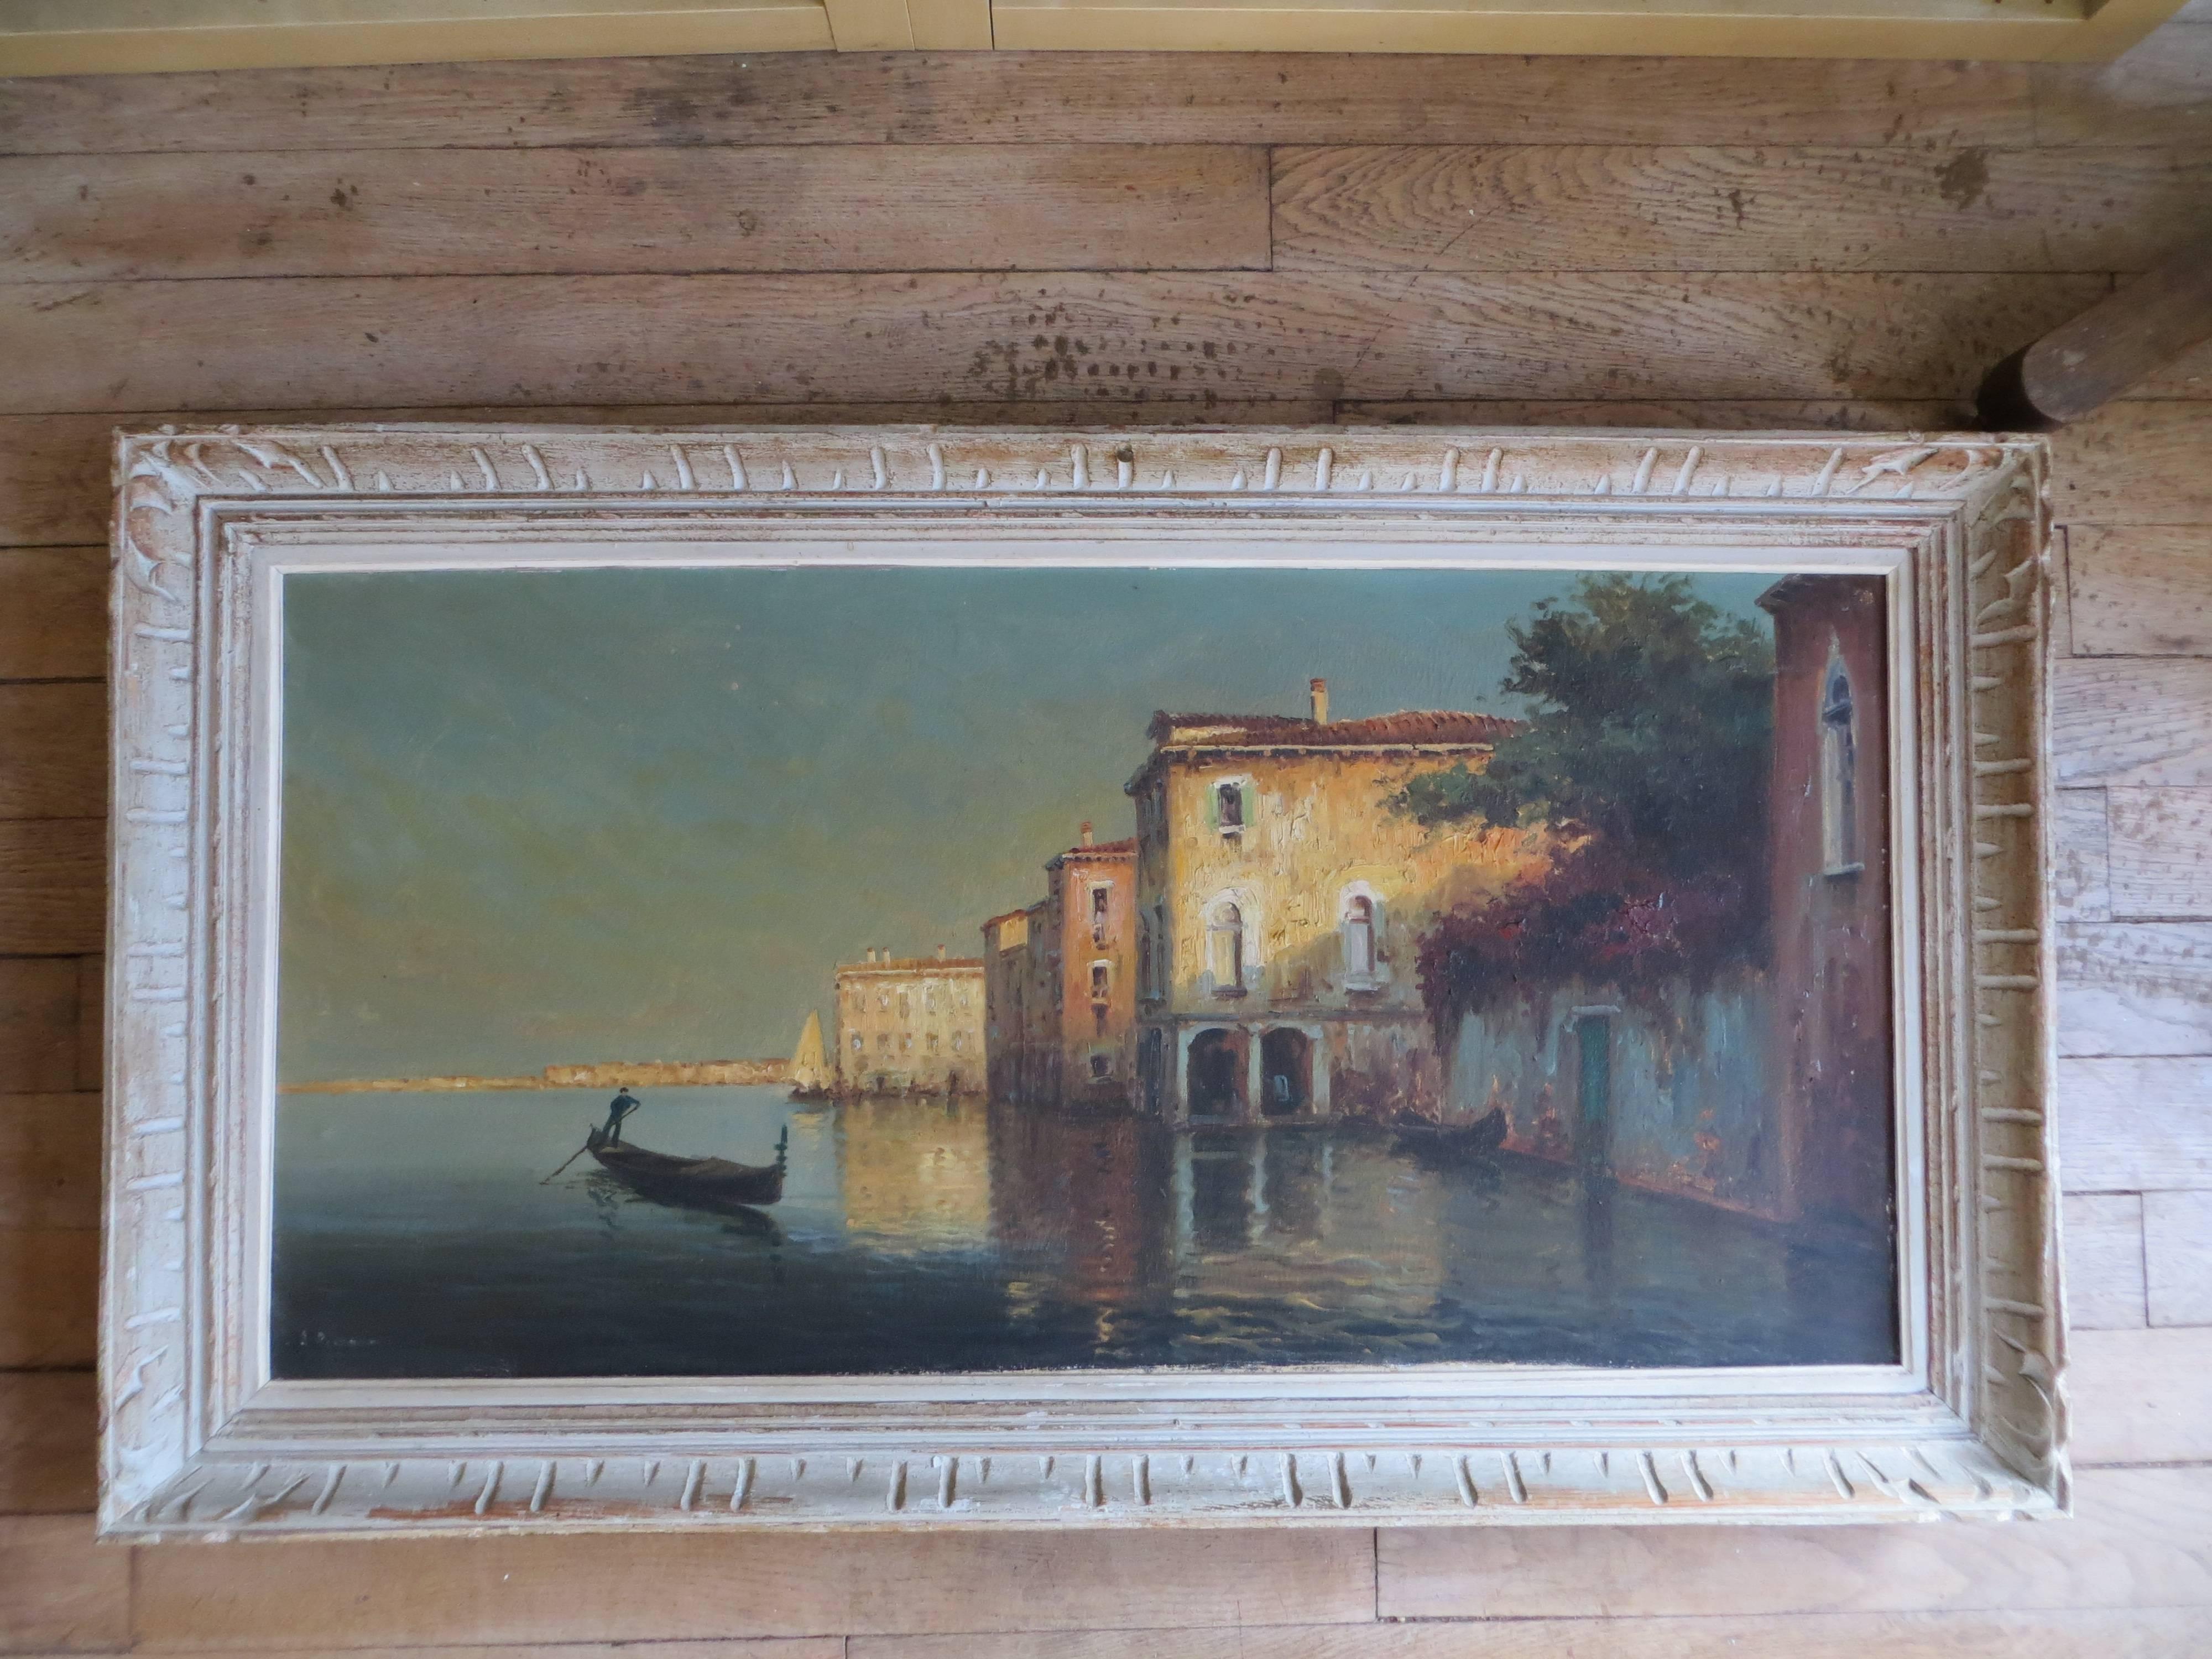 The Laguna in Venice - Painting by Unknown